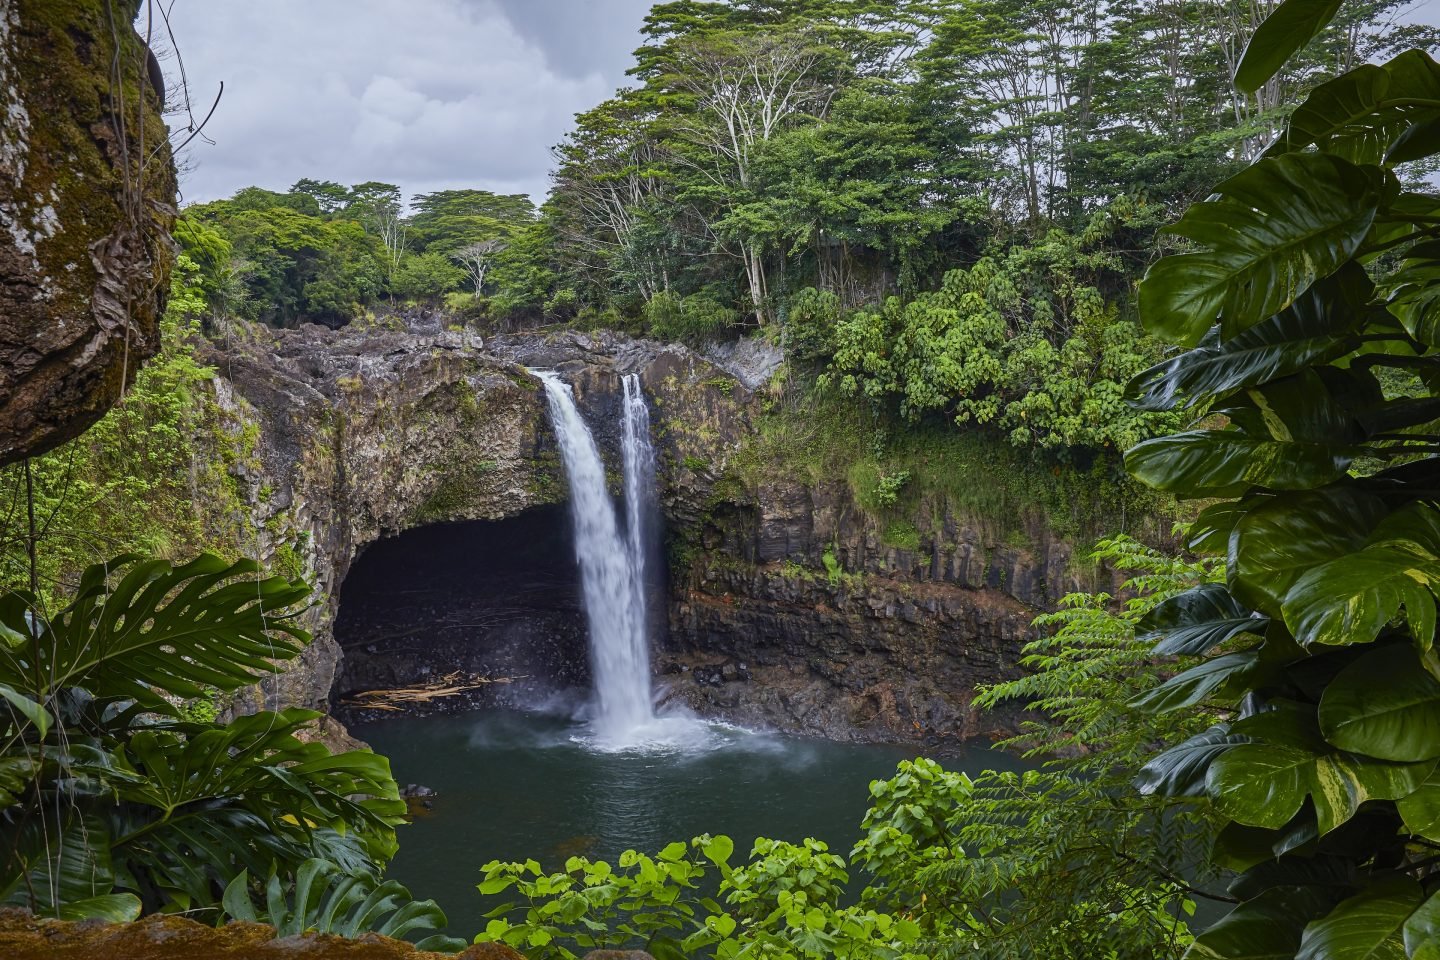 best time to visit big island of hawaii